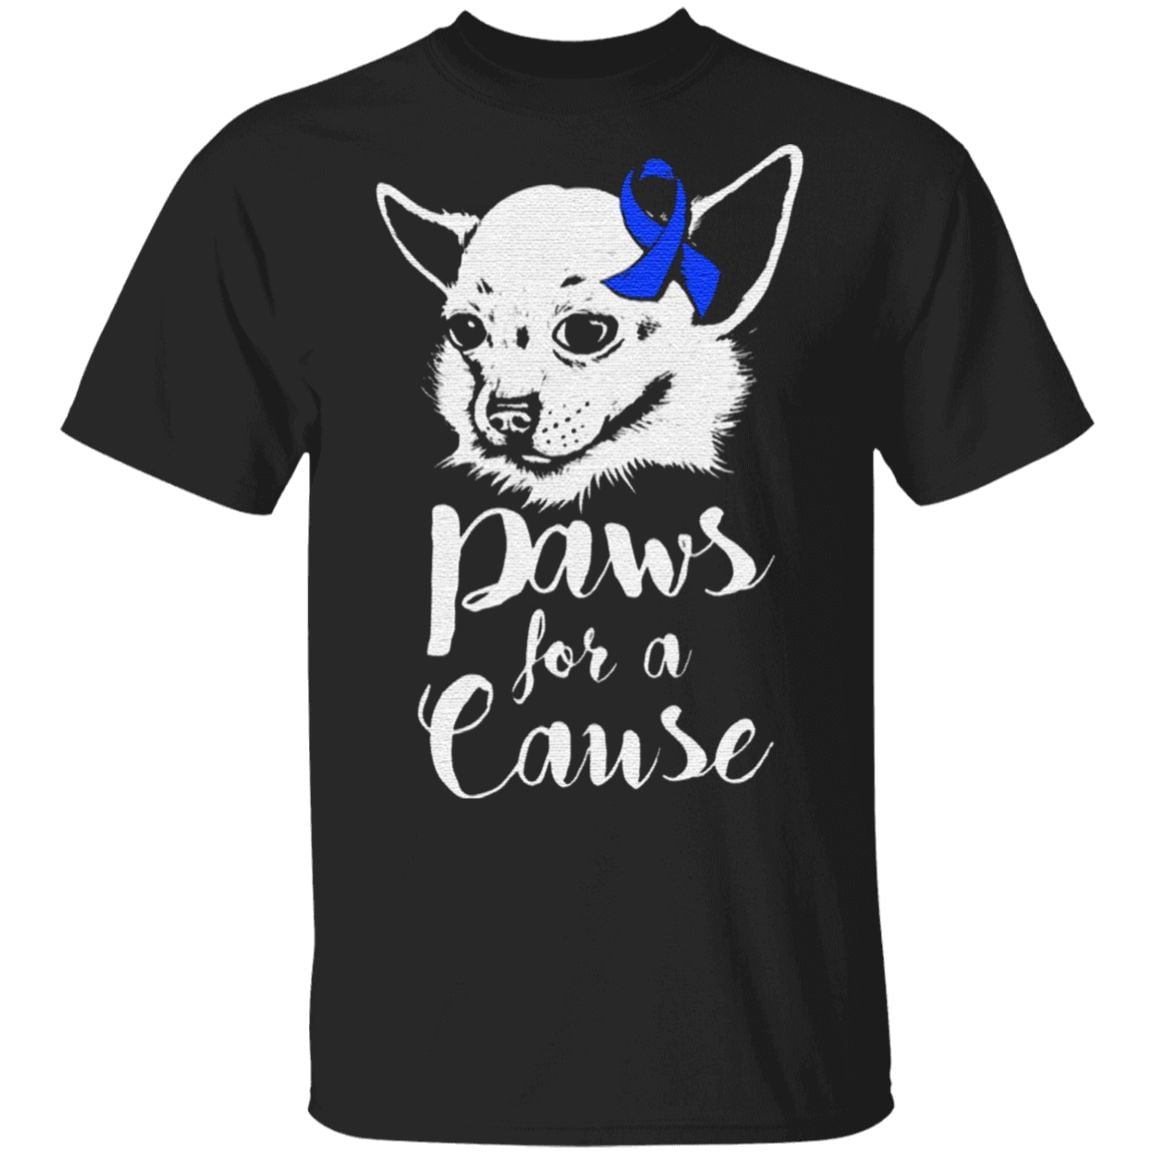 Paws For a Cause Child Abuse TShirt